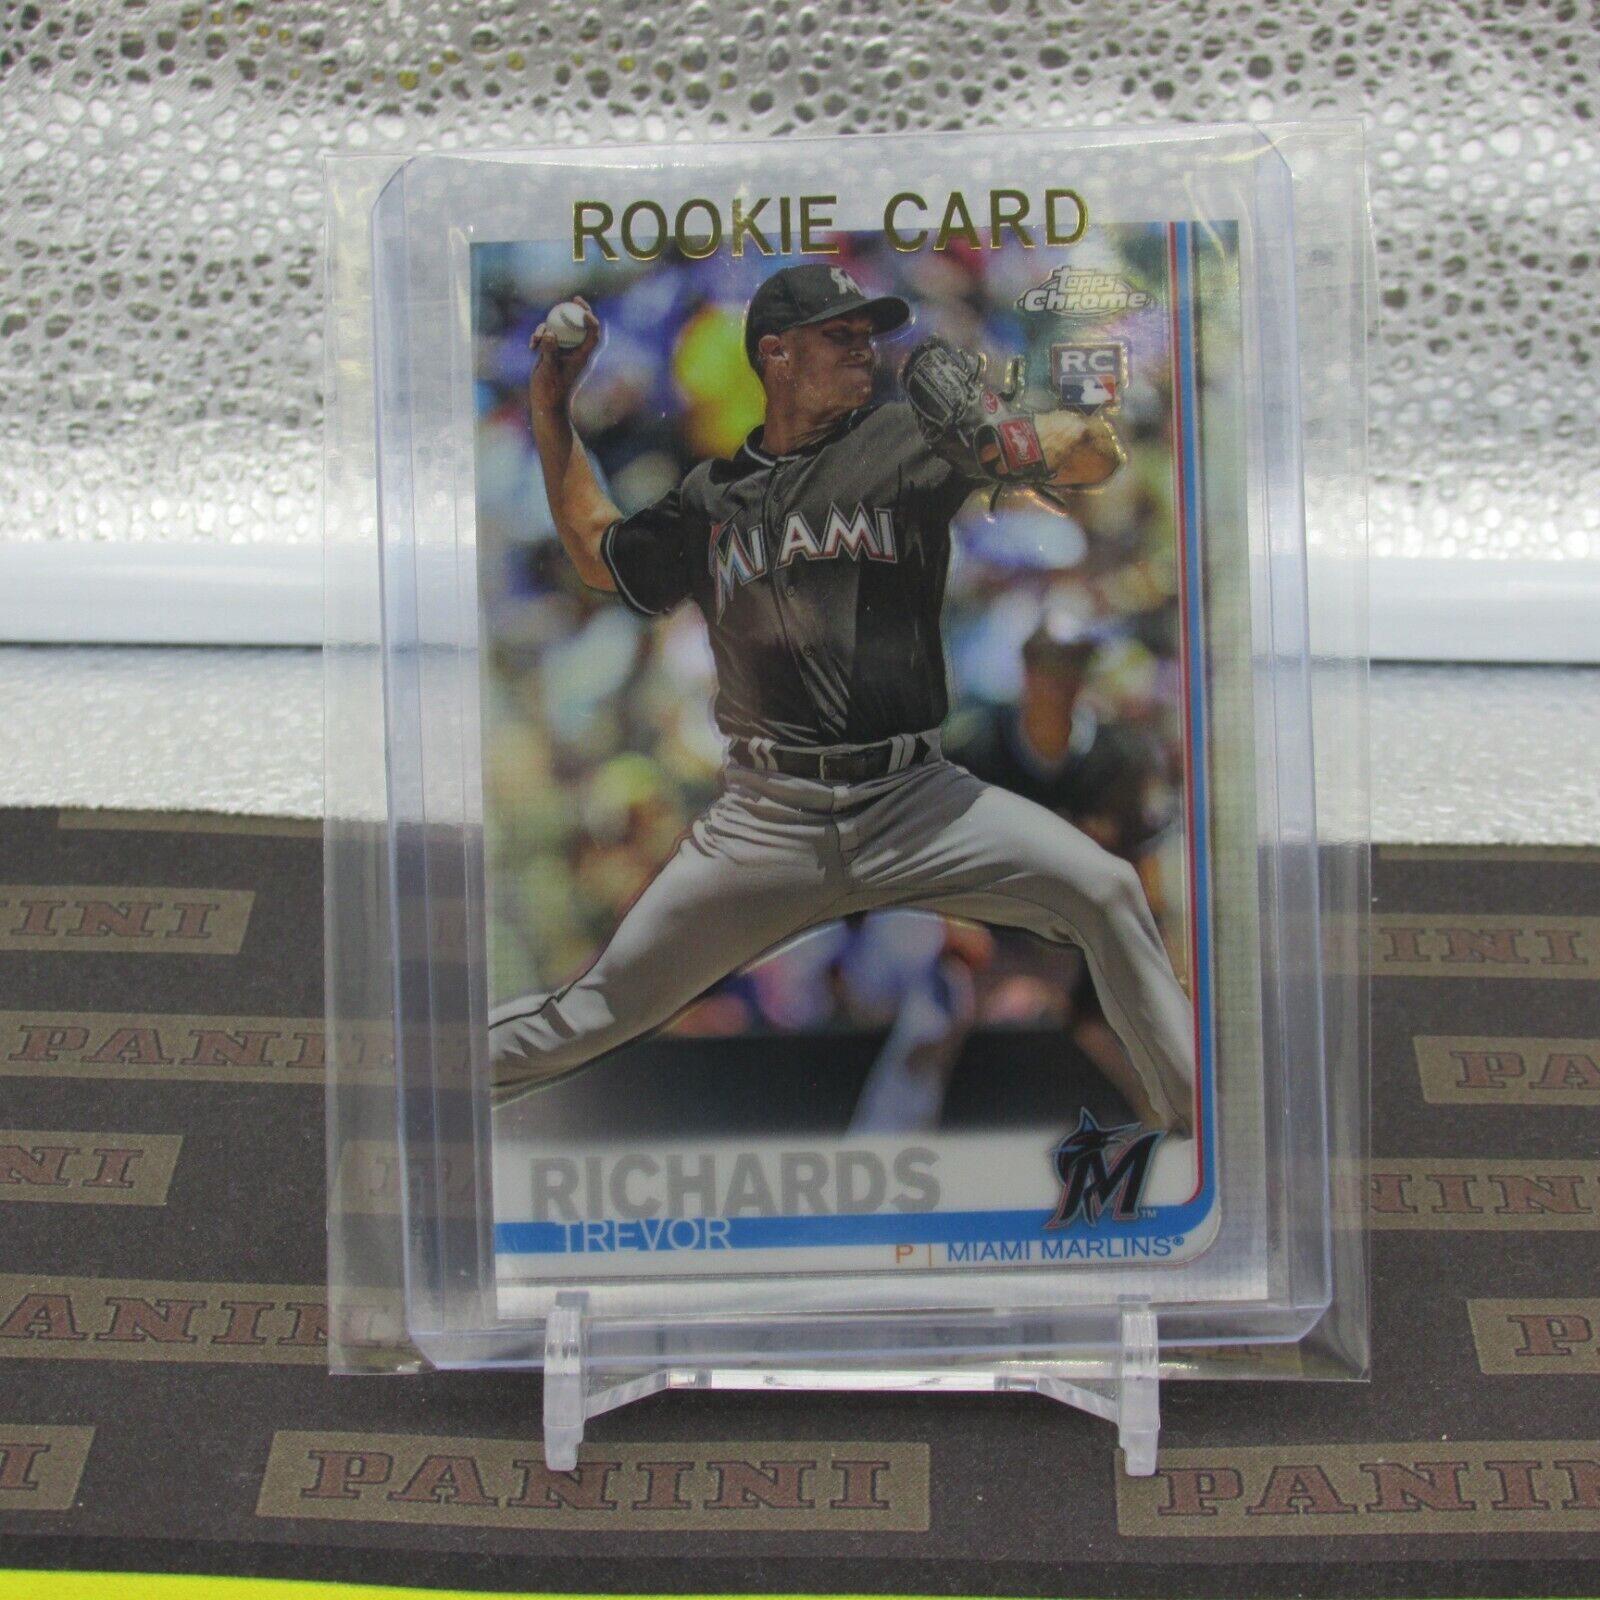 2019 Topps Chrome Trevor Richards Refractor Rookie Baseball Card #93. rookie card picture